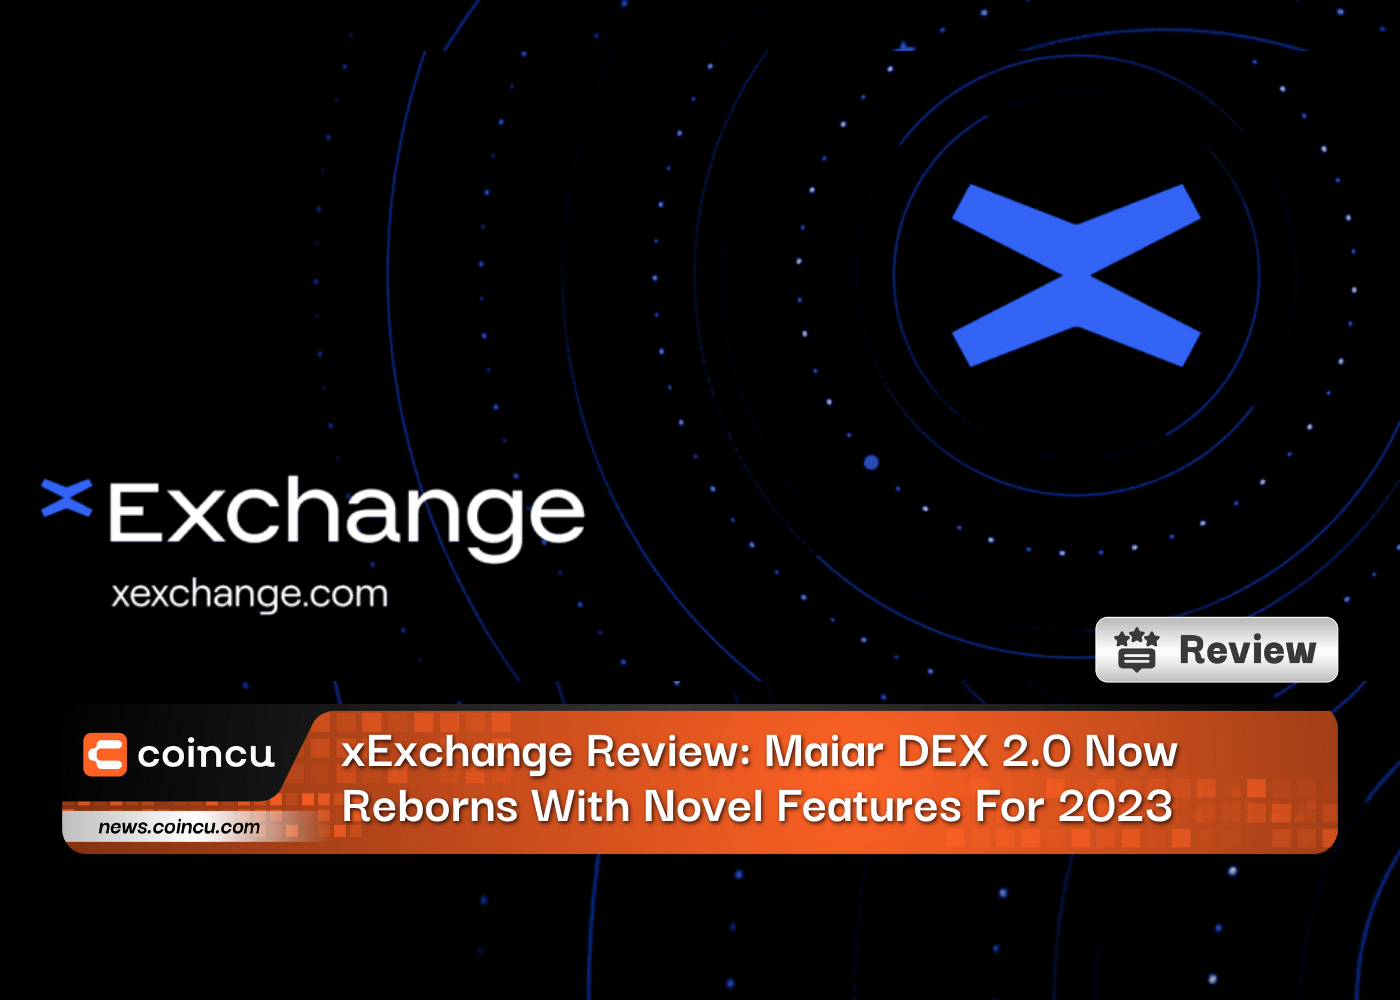 xExchange Review: Maiar DEX 2.0 Now Reborns With Novel Features For 2023